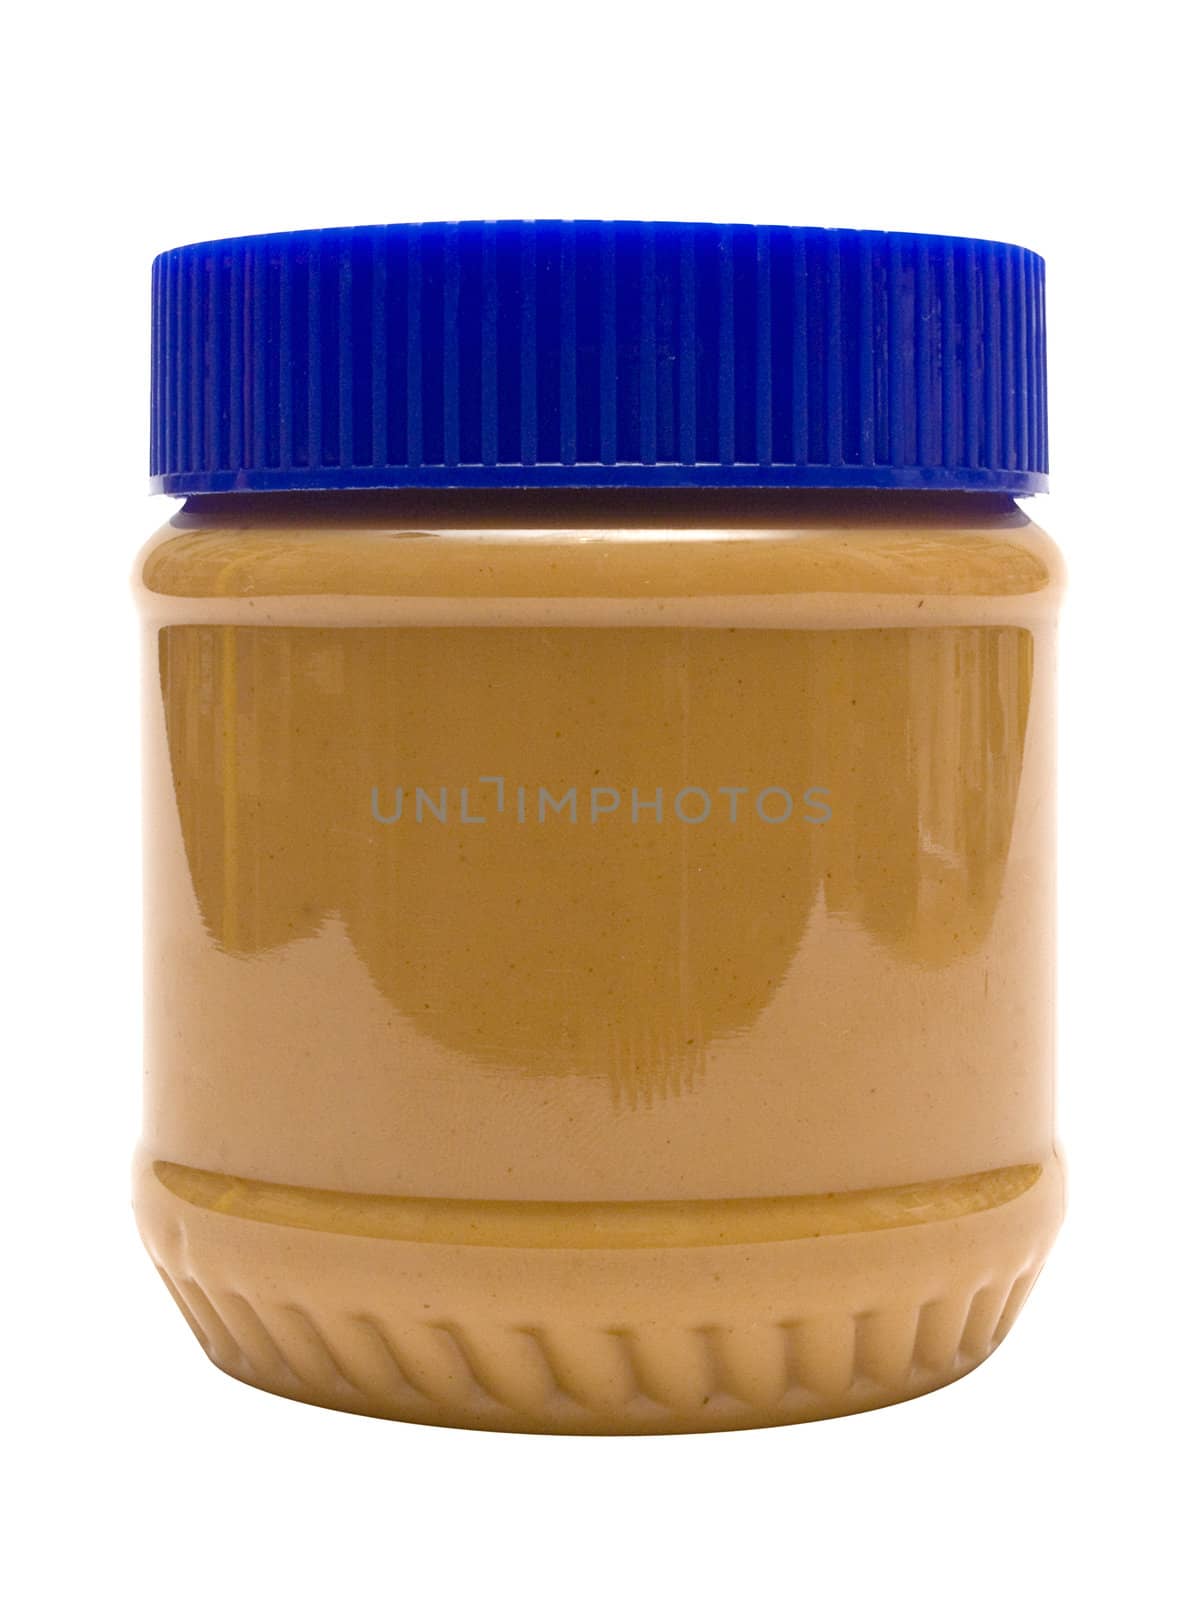 Peanut Butter with Clipping Path by winterling